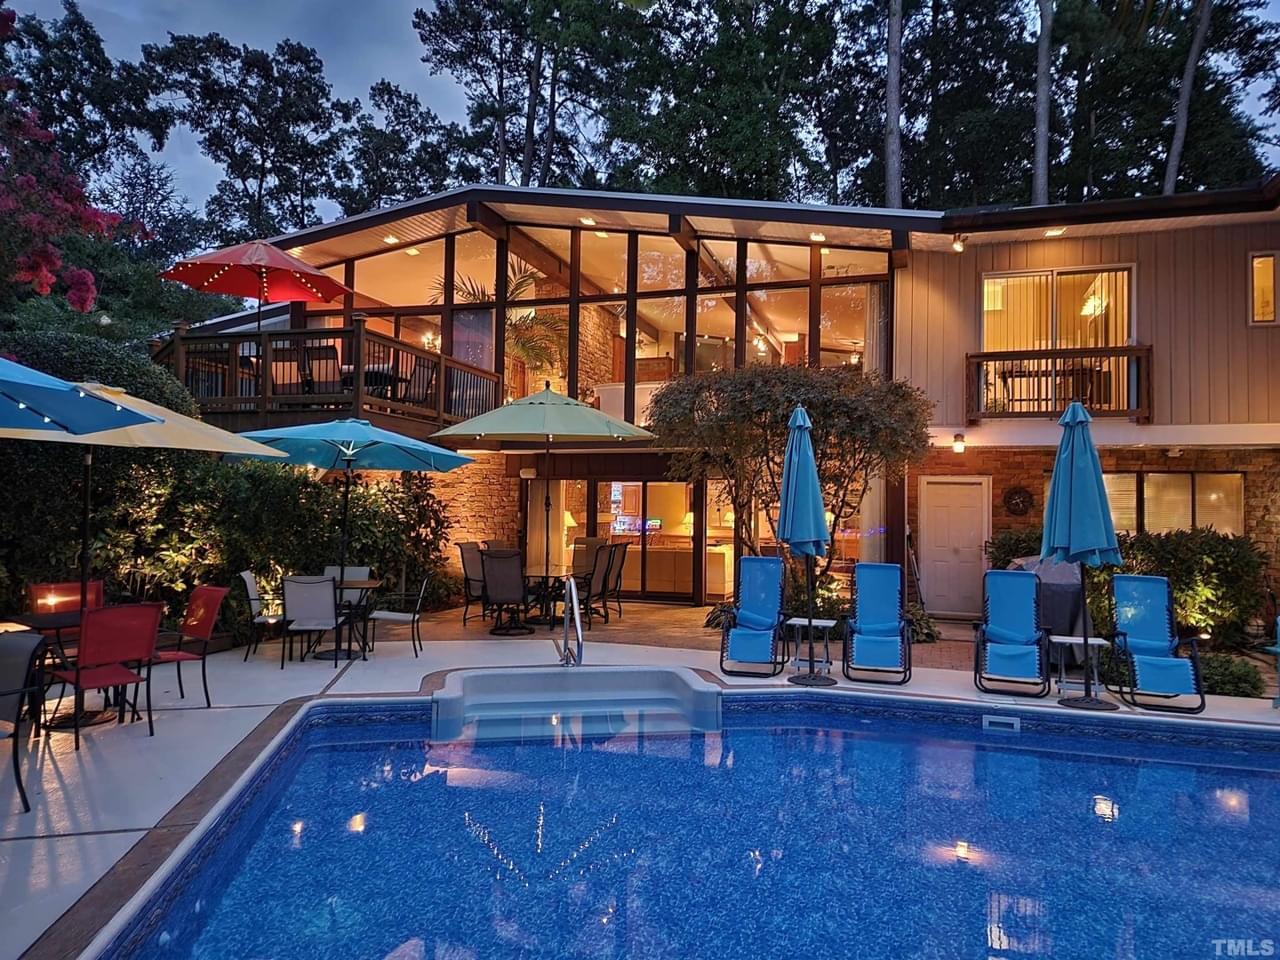 A large home with a crystal blue pool, floor-to-ceiling windows, multiple balconies, and resort-style outdoor furniture, surrounded by trees